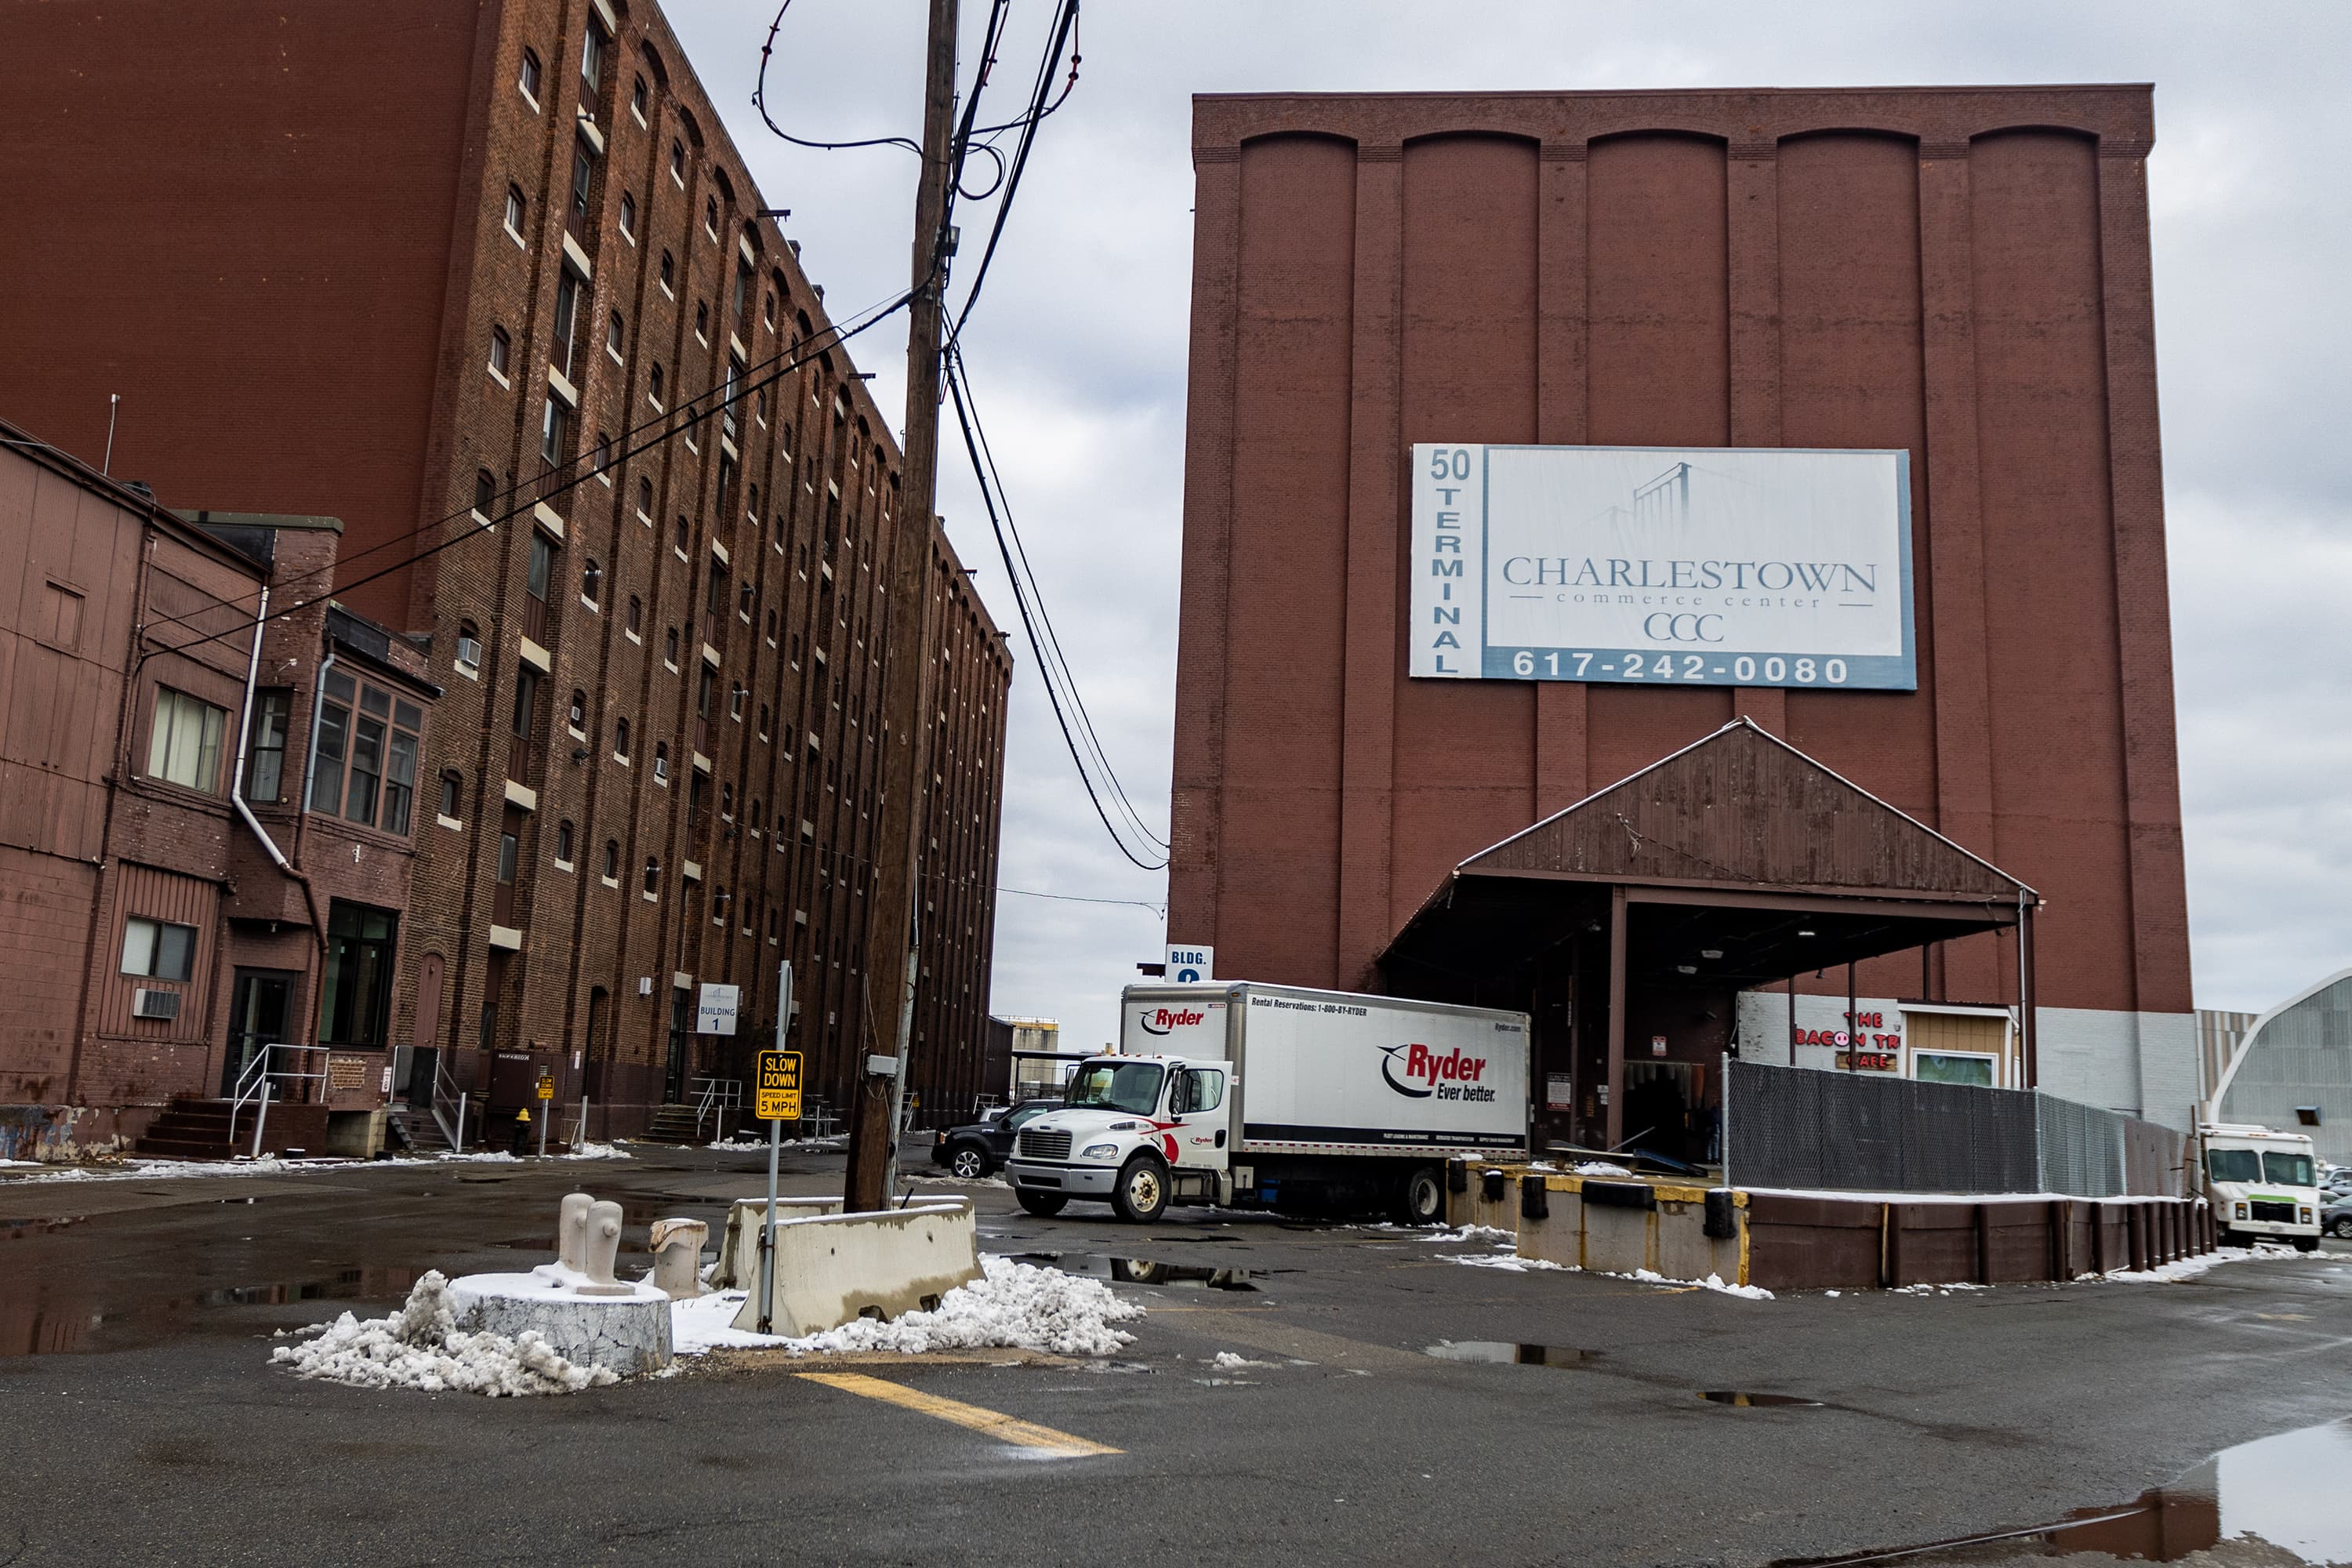 The warehouse building where Charlestown Rehearsal Studios is located. (Jesse Costa/WBUR)